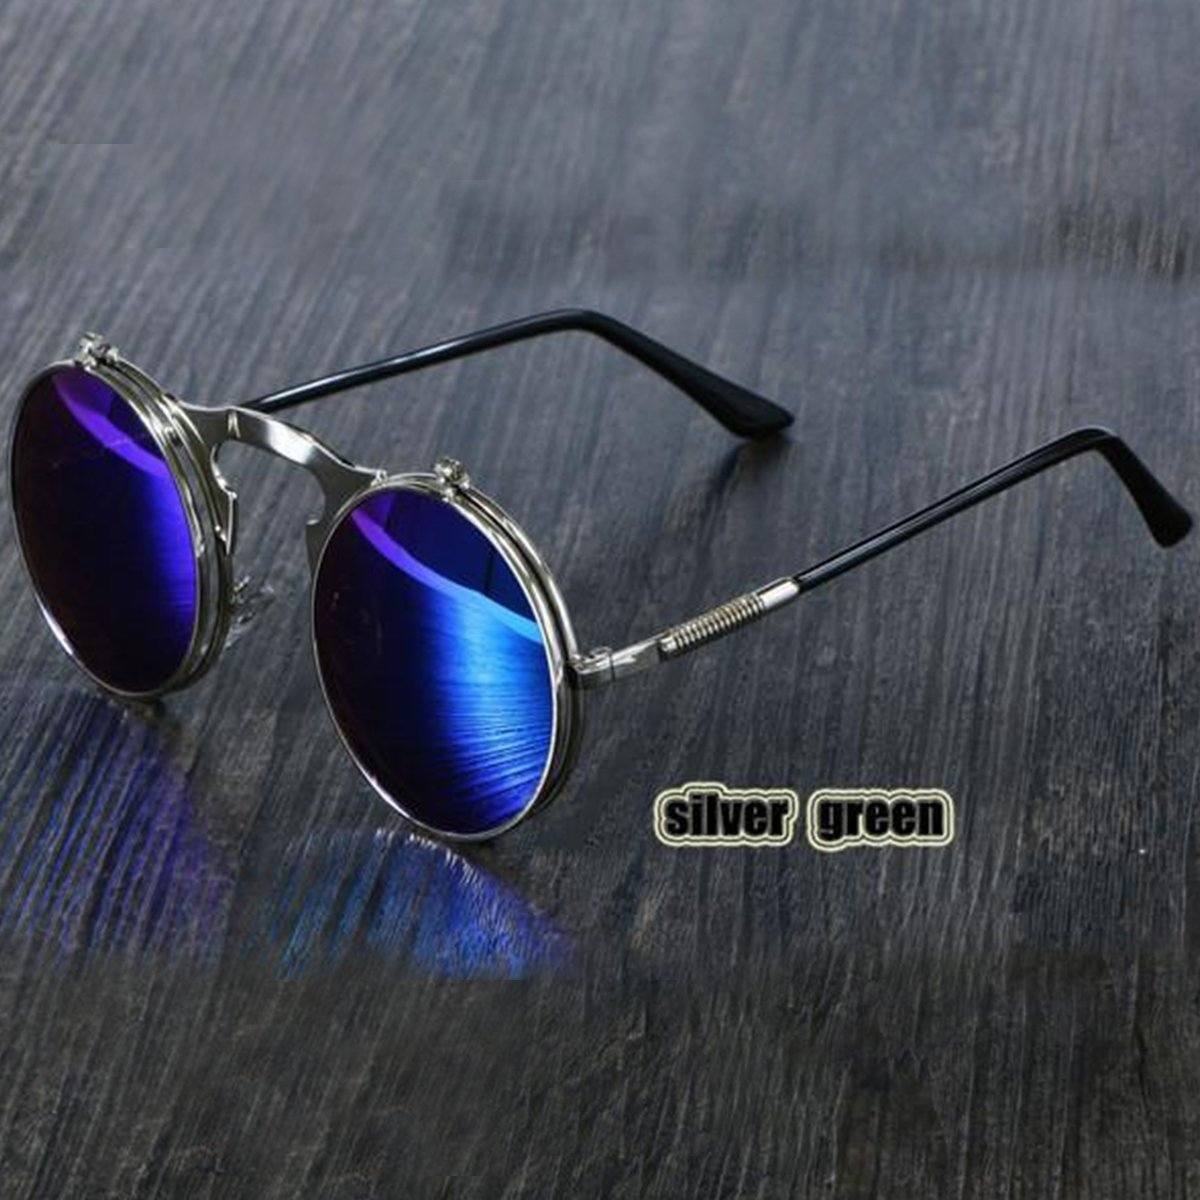 A pair of Steampunk Flip-Up Round Double Lens Sunglasses with blue mirrored lenses.